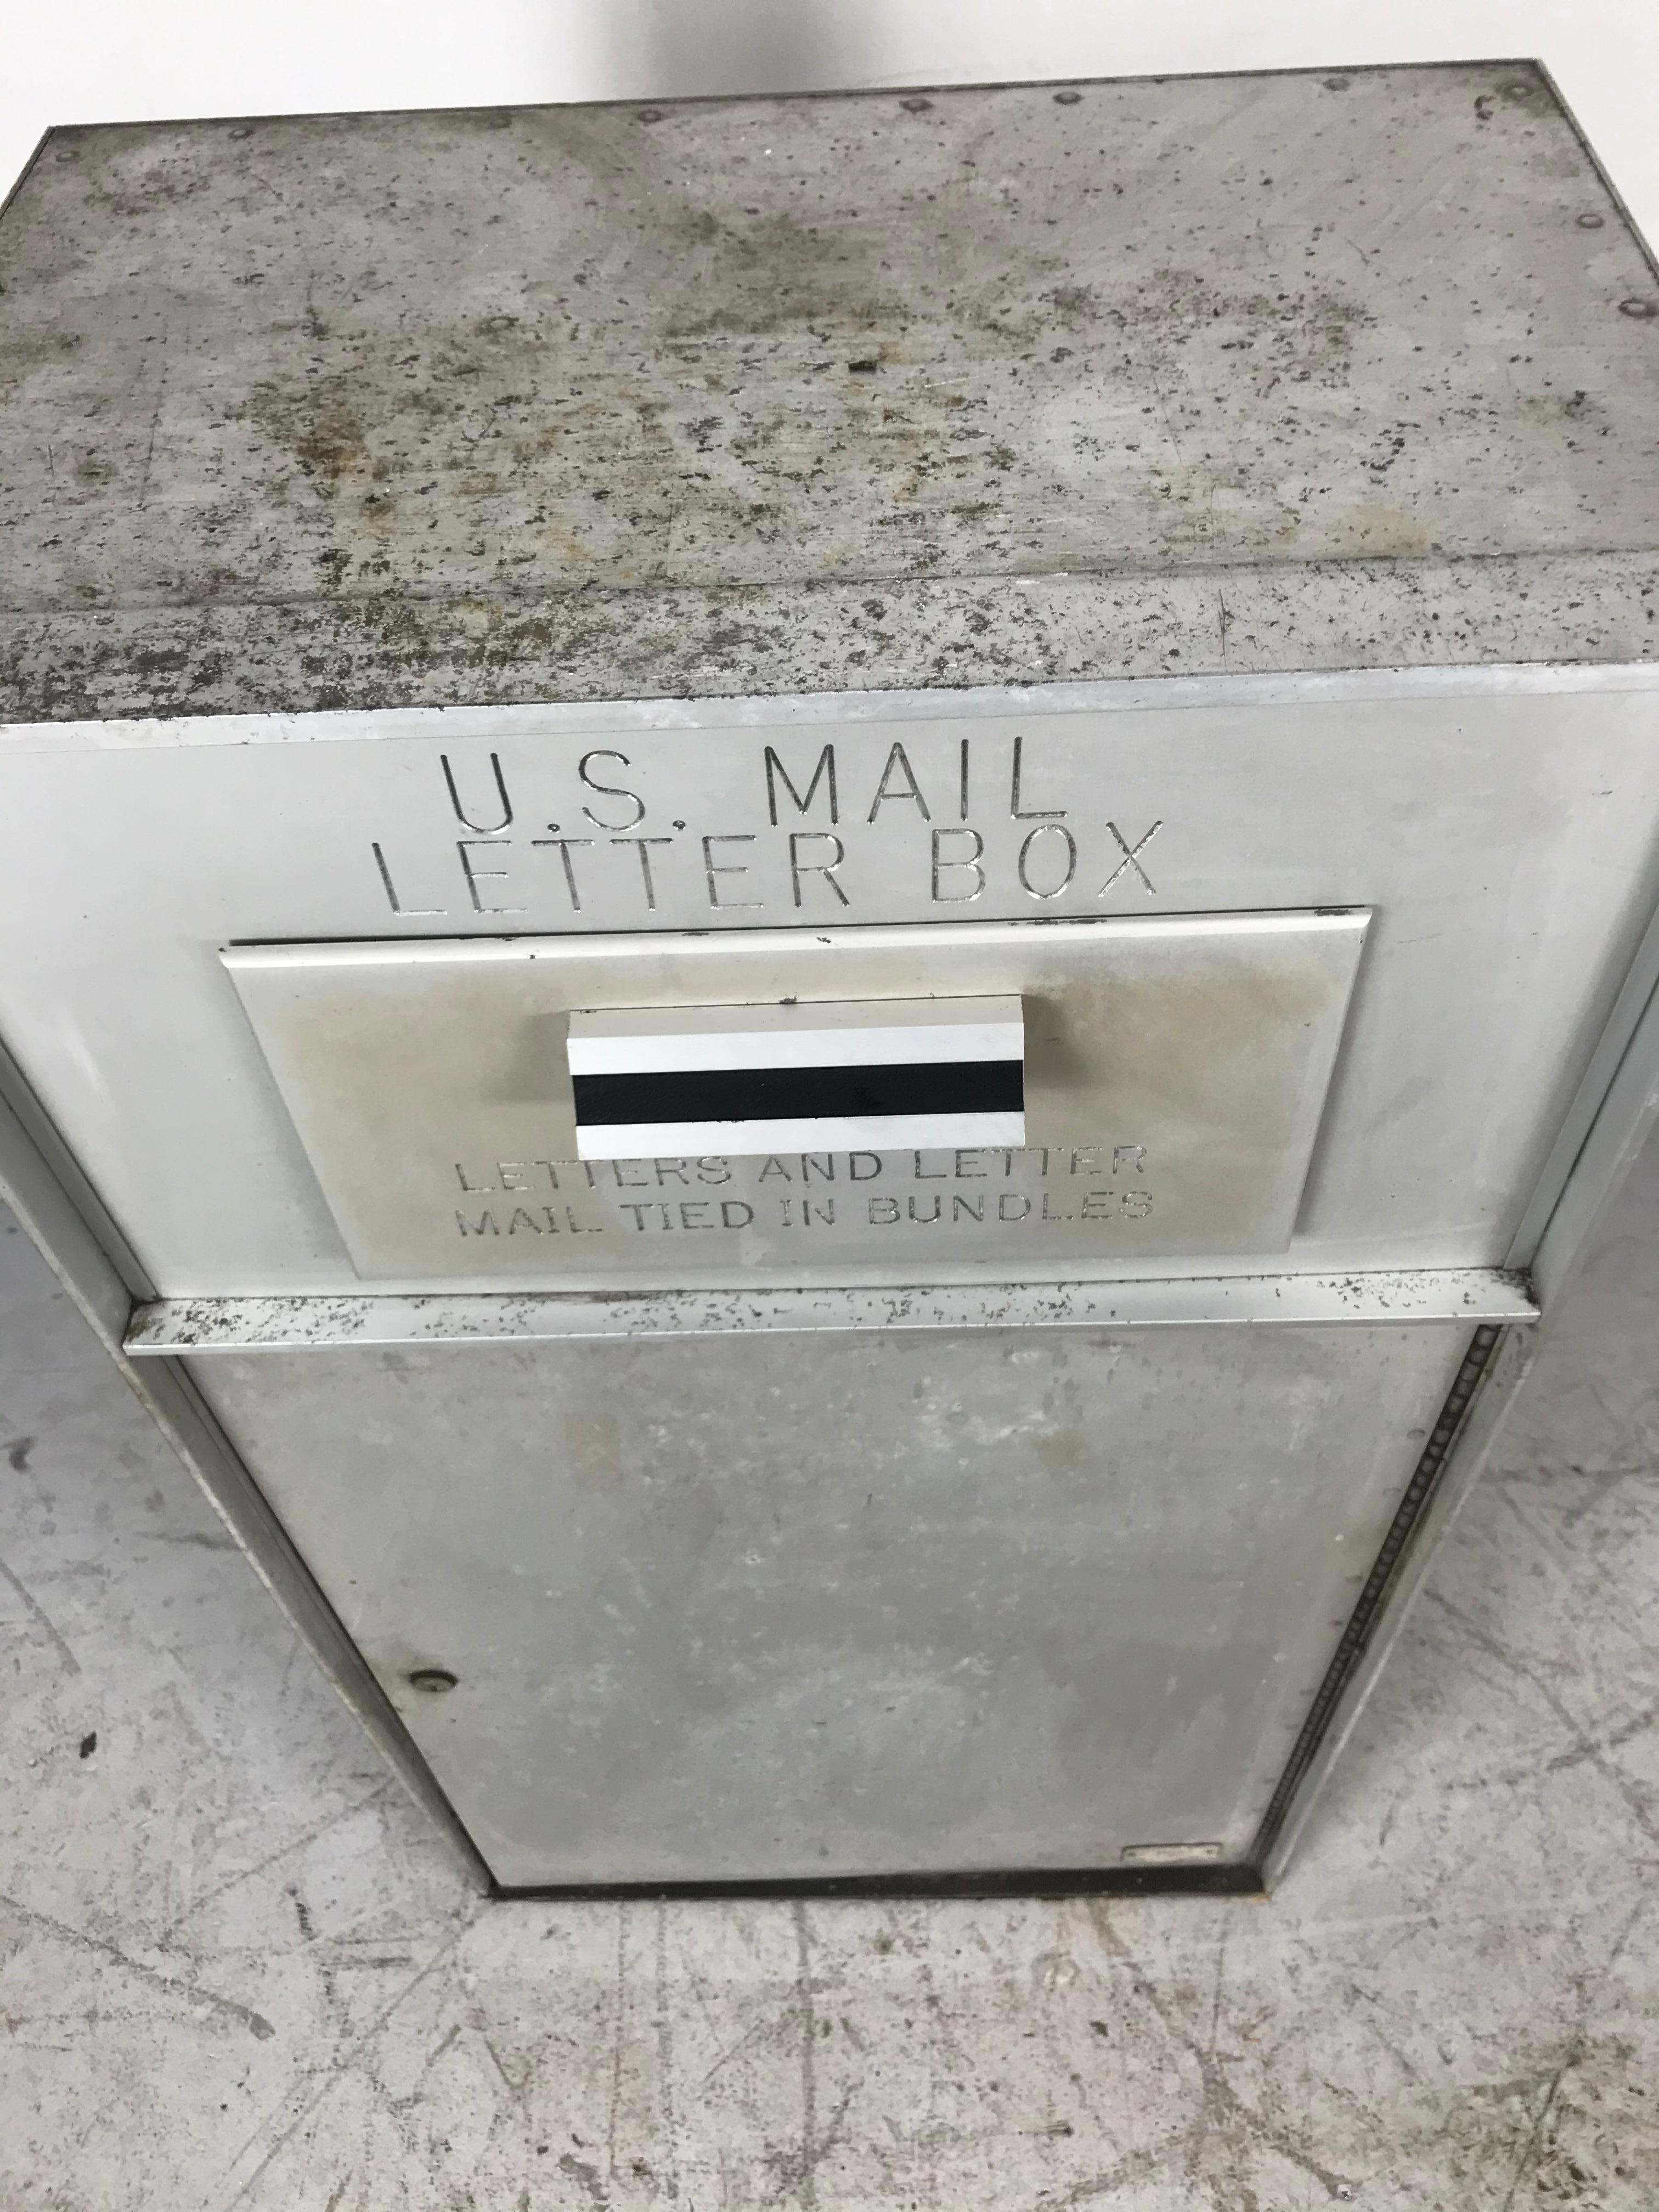 1950s all aluminum United States mail letter box, manufactured by Bommer Industries, simple Classic design, would make an amazing piggy bank, pull down handle door, mail slot, large keyed lower door.